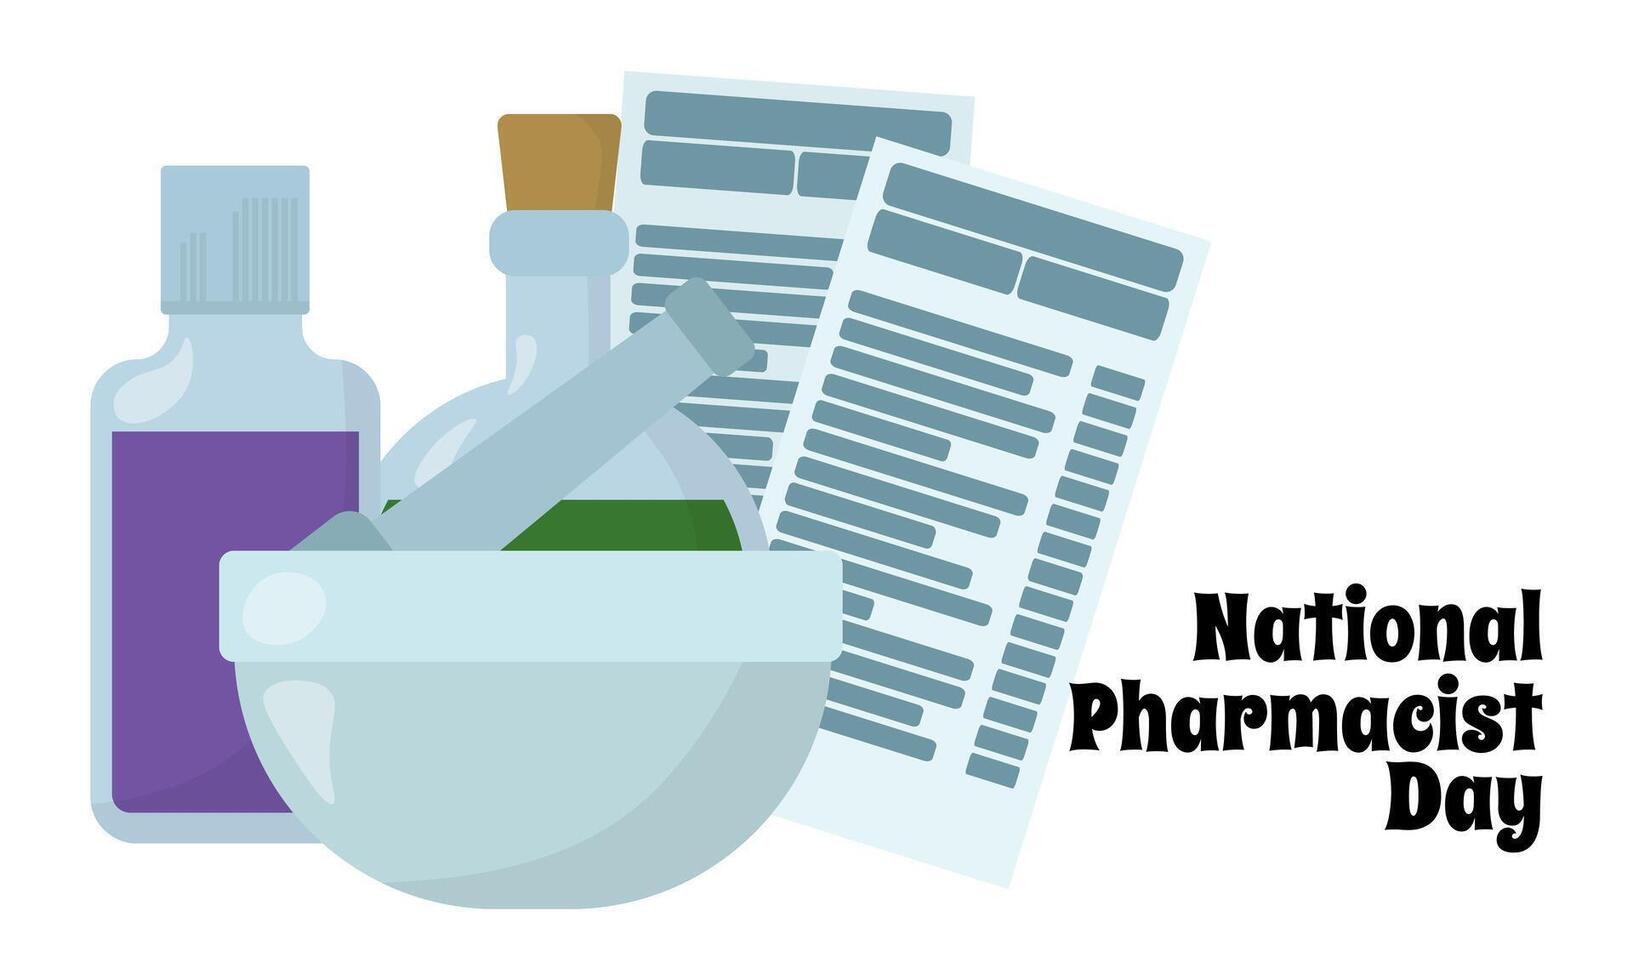 National Pharmacist Day, idea for a poster or banner design for a medical theme vector